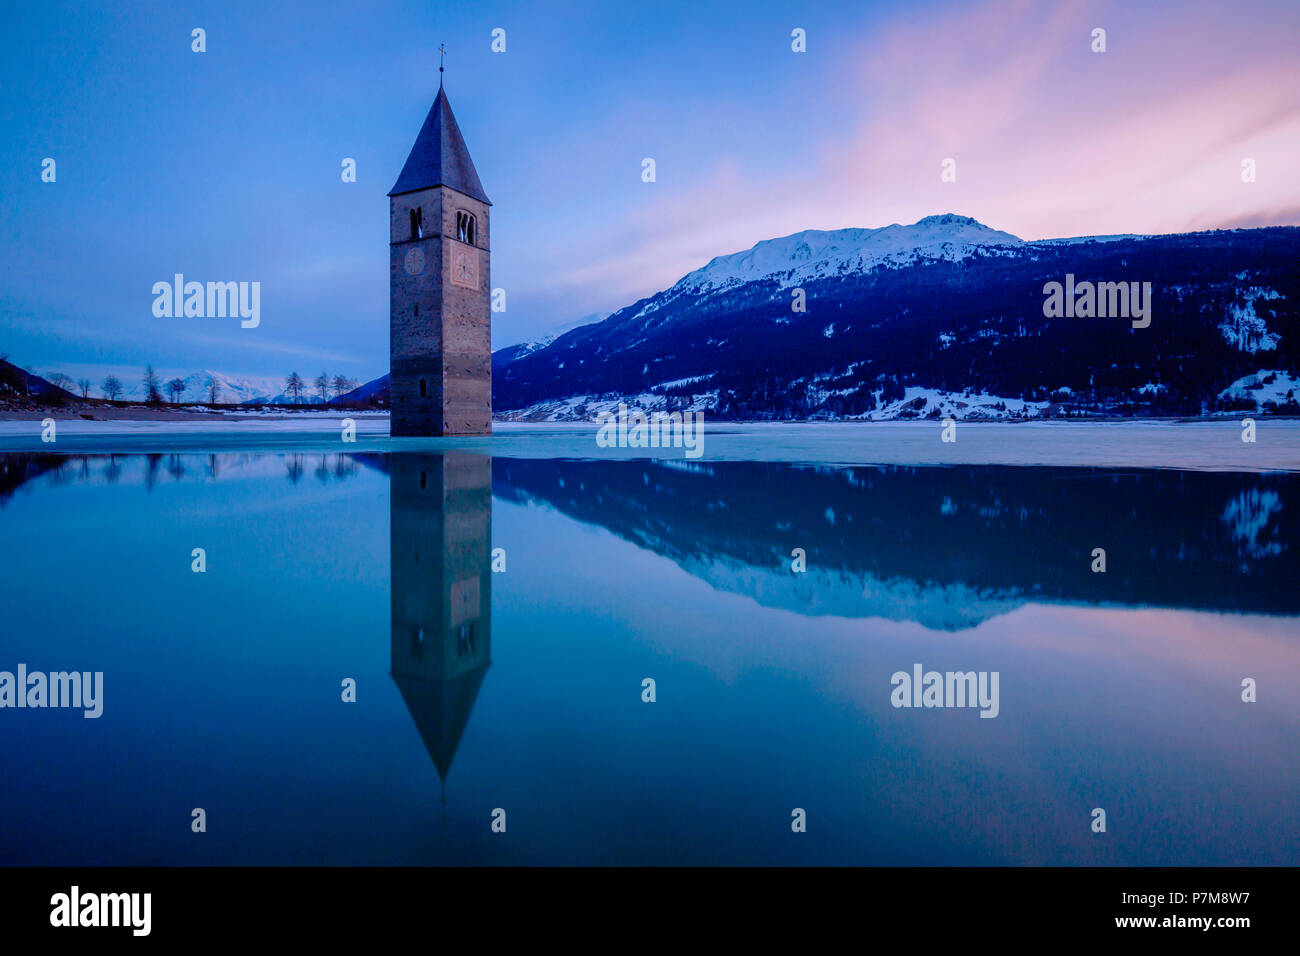 The bell-tower of Graun in Vinschgau at dusk, Reschensee - Lago di Resia, Bolzano, South Tyrol, Trentino Alto Adige, Italy Stock Photo